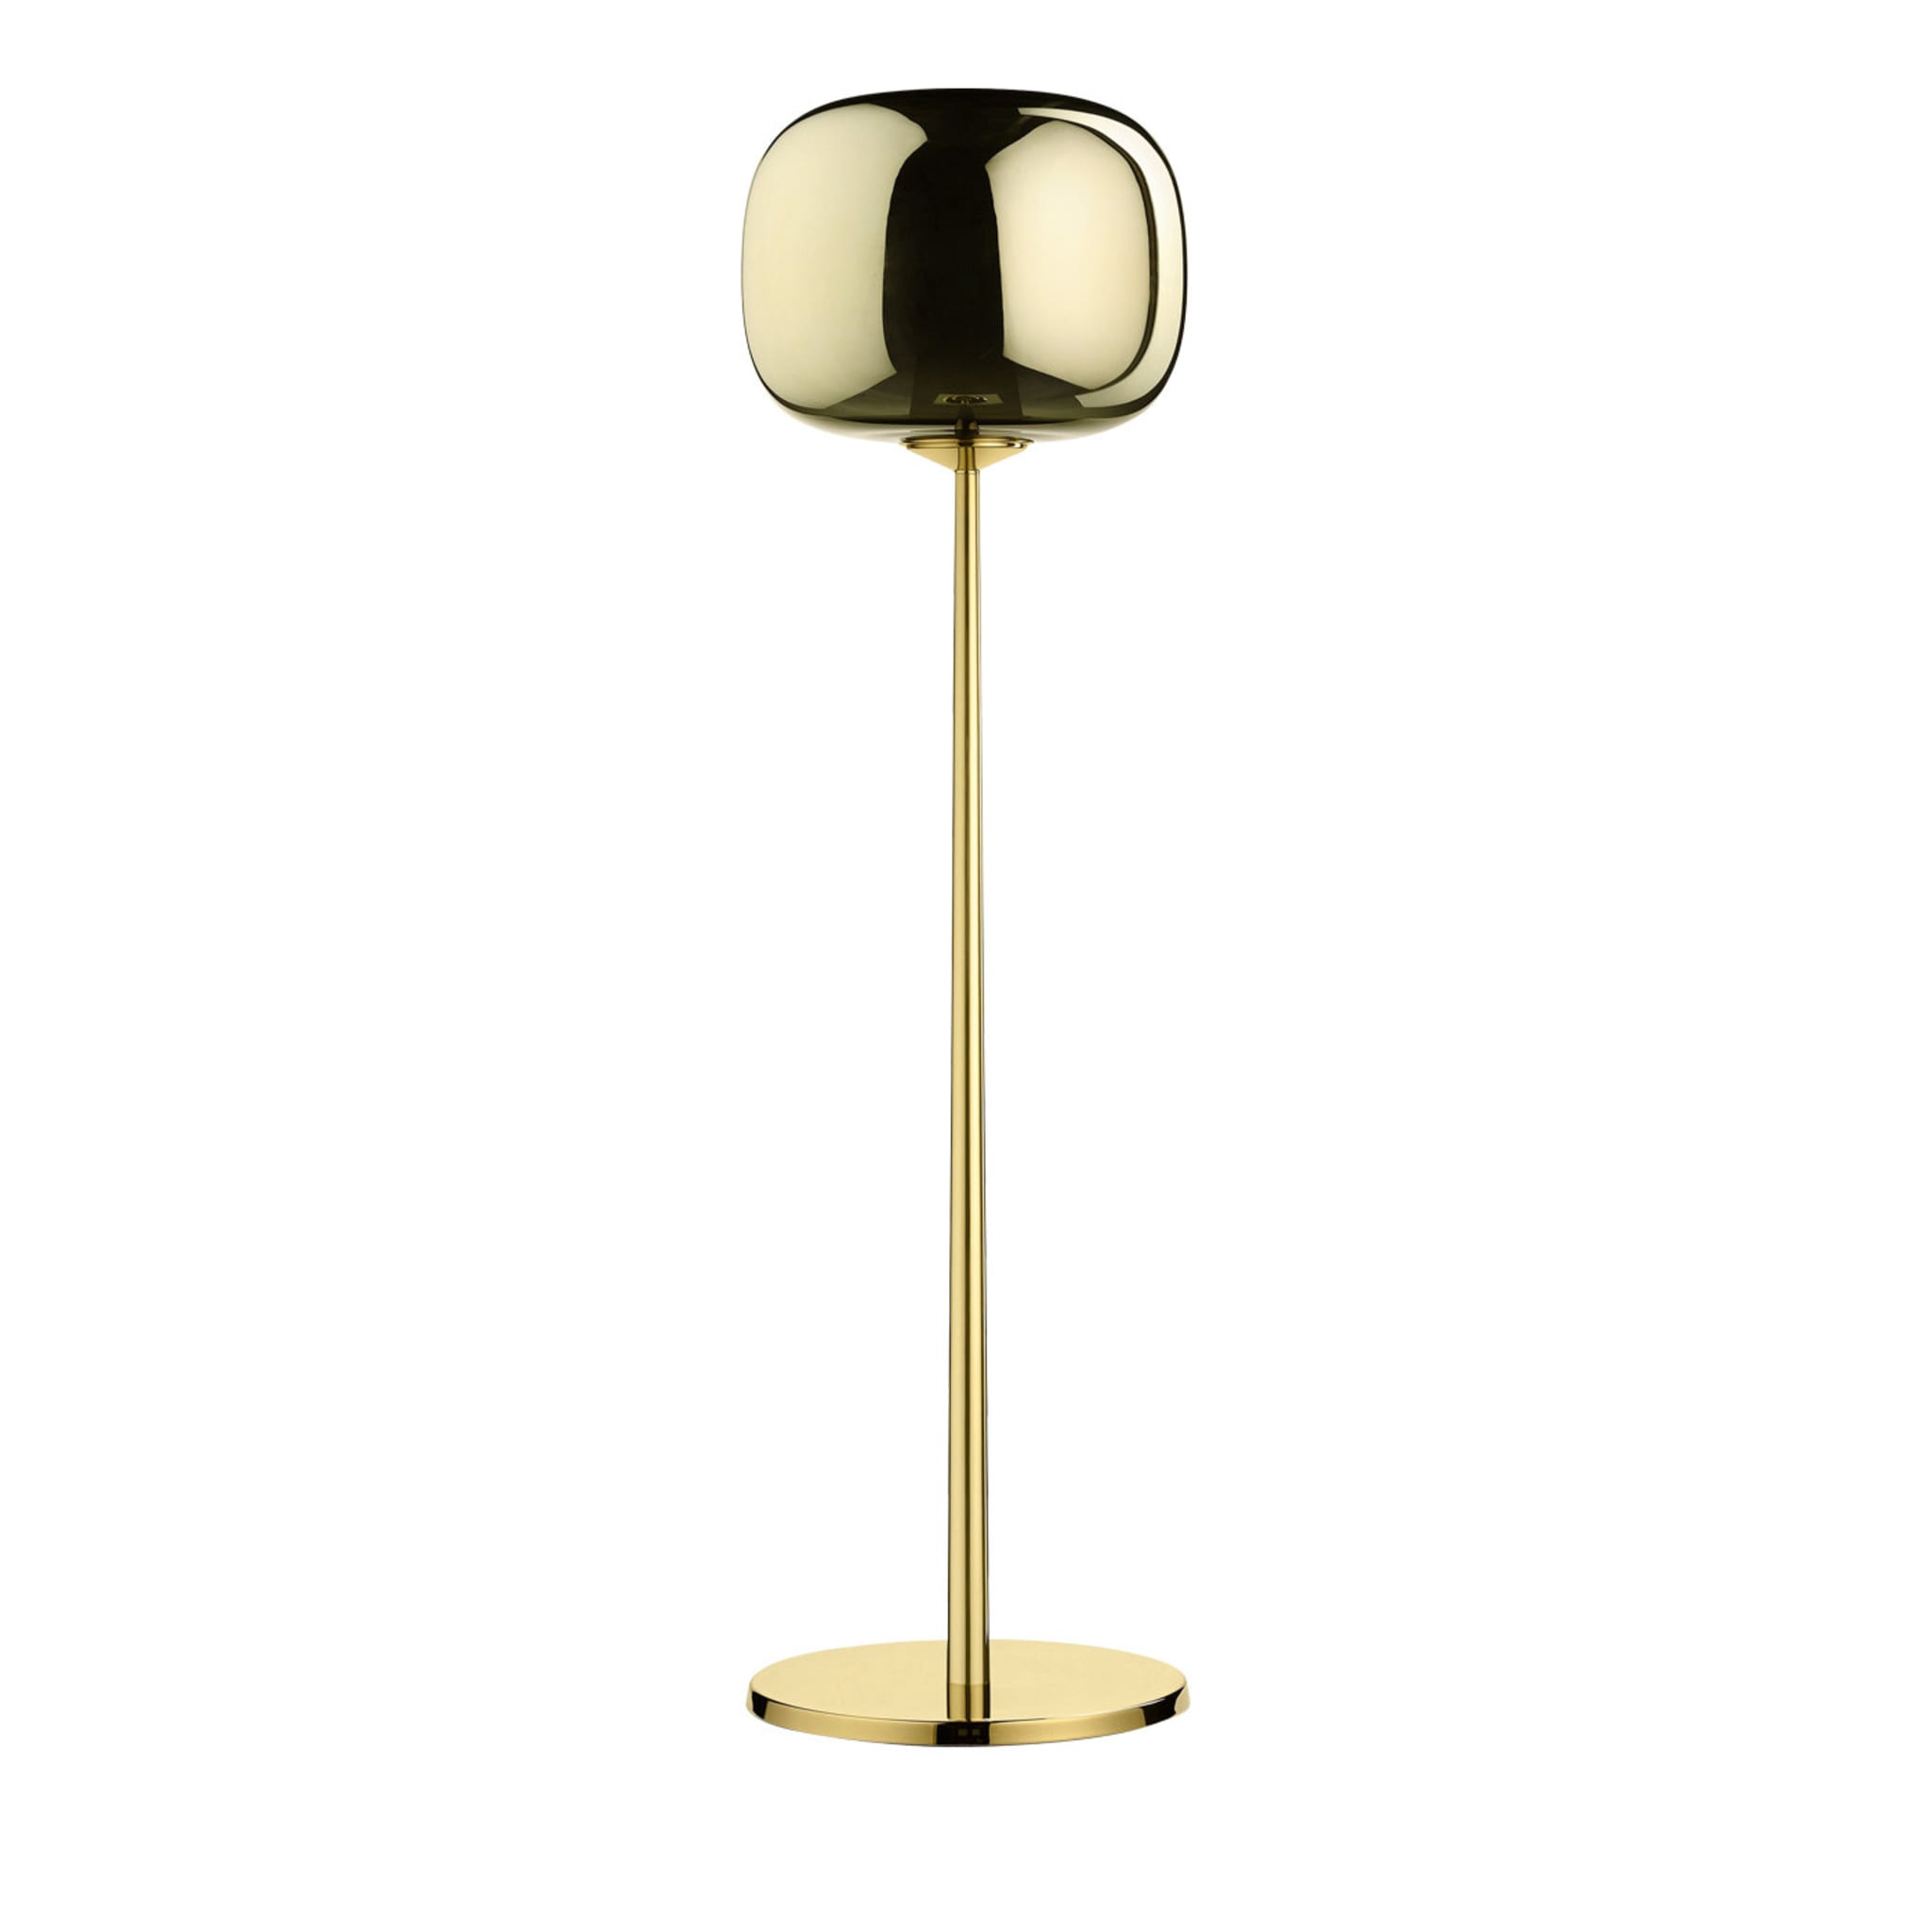 Dusk Dawn Floor Lamp in Polished Brass Finish By Branch Creative - Main view